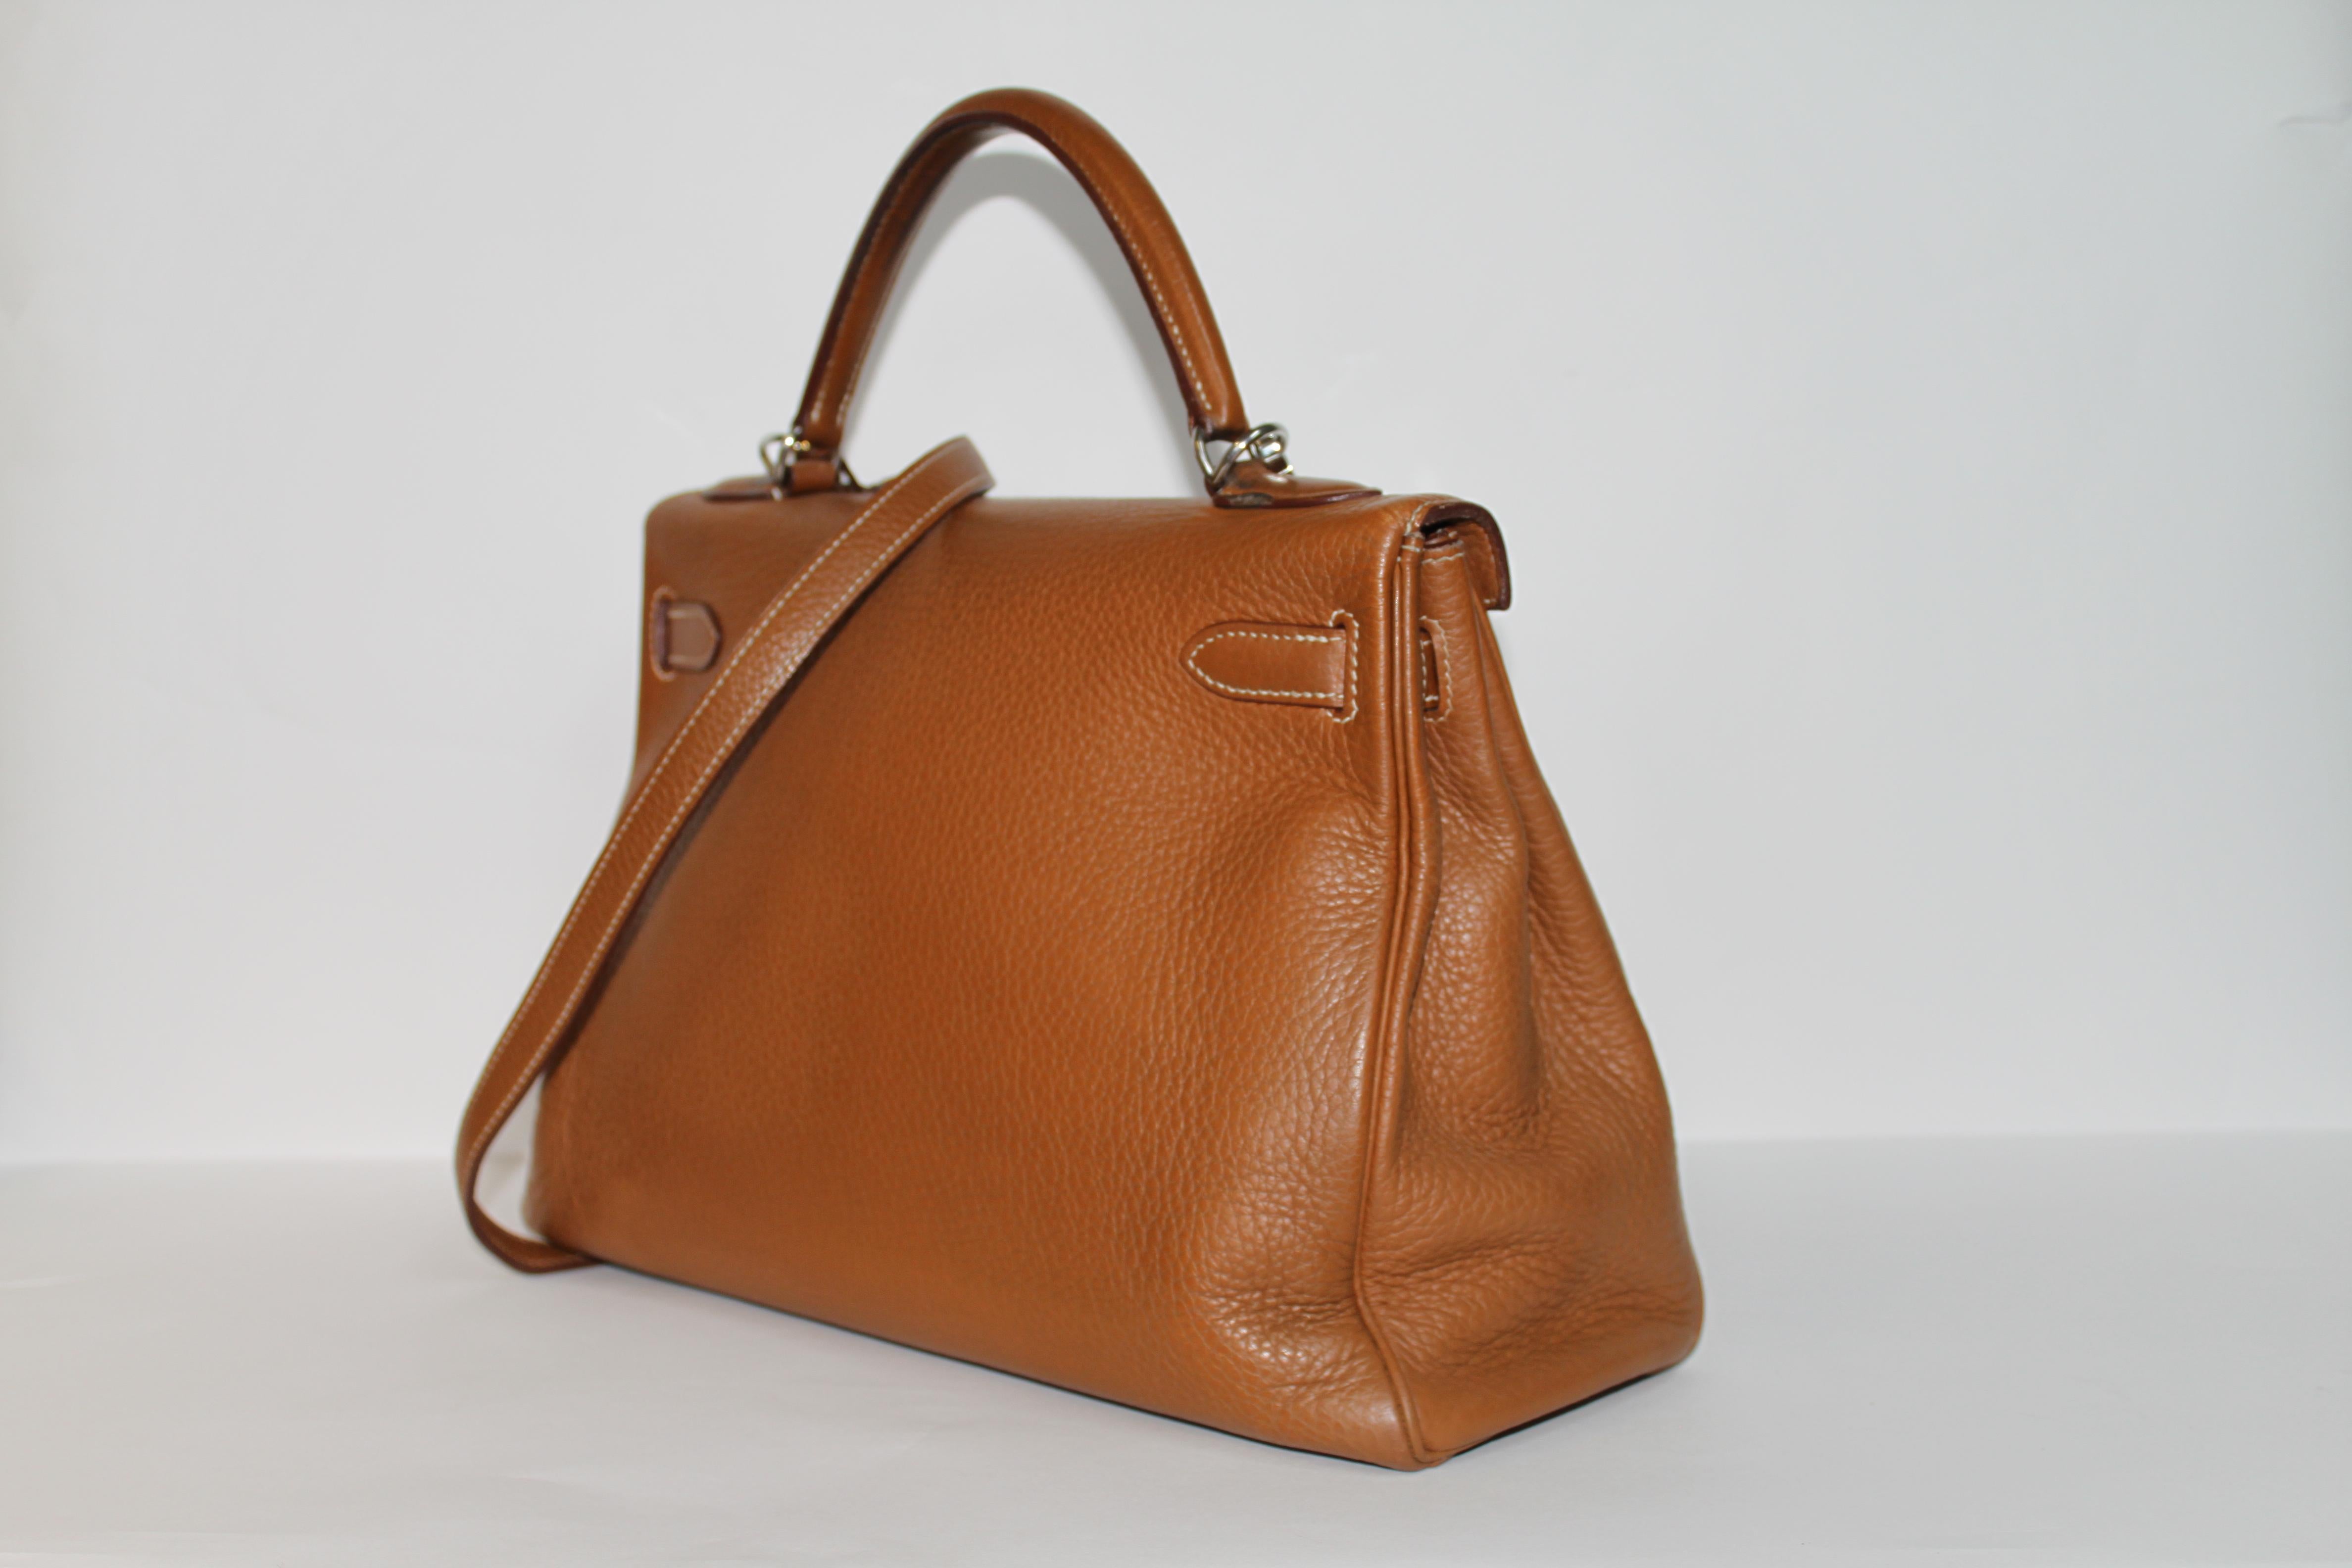 Hermes Kelly 32 Bag brown leather epsom/tan with silver Hardware Tote/Crossbody In Good Condition For Sale In Berlin, DE